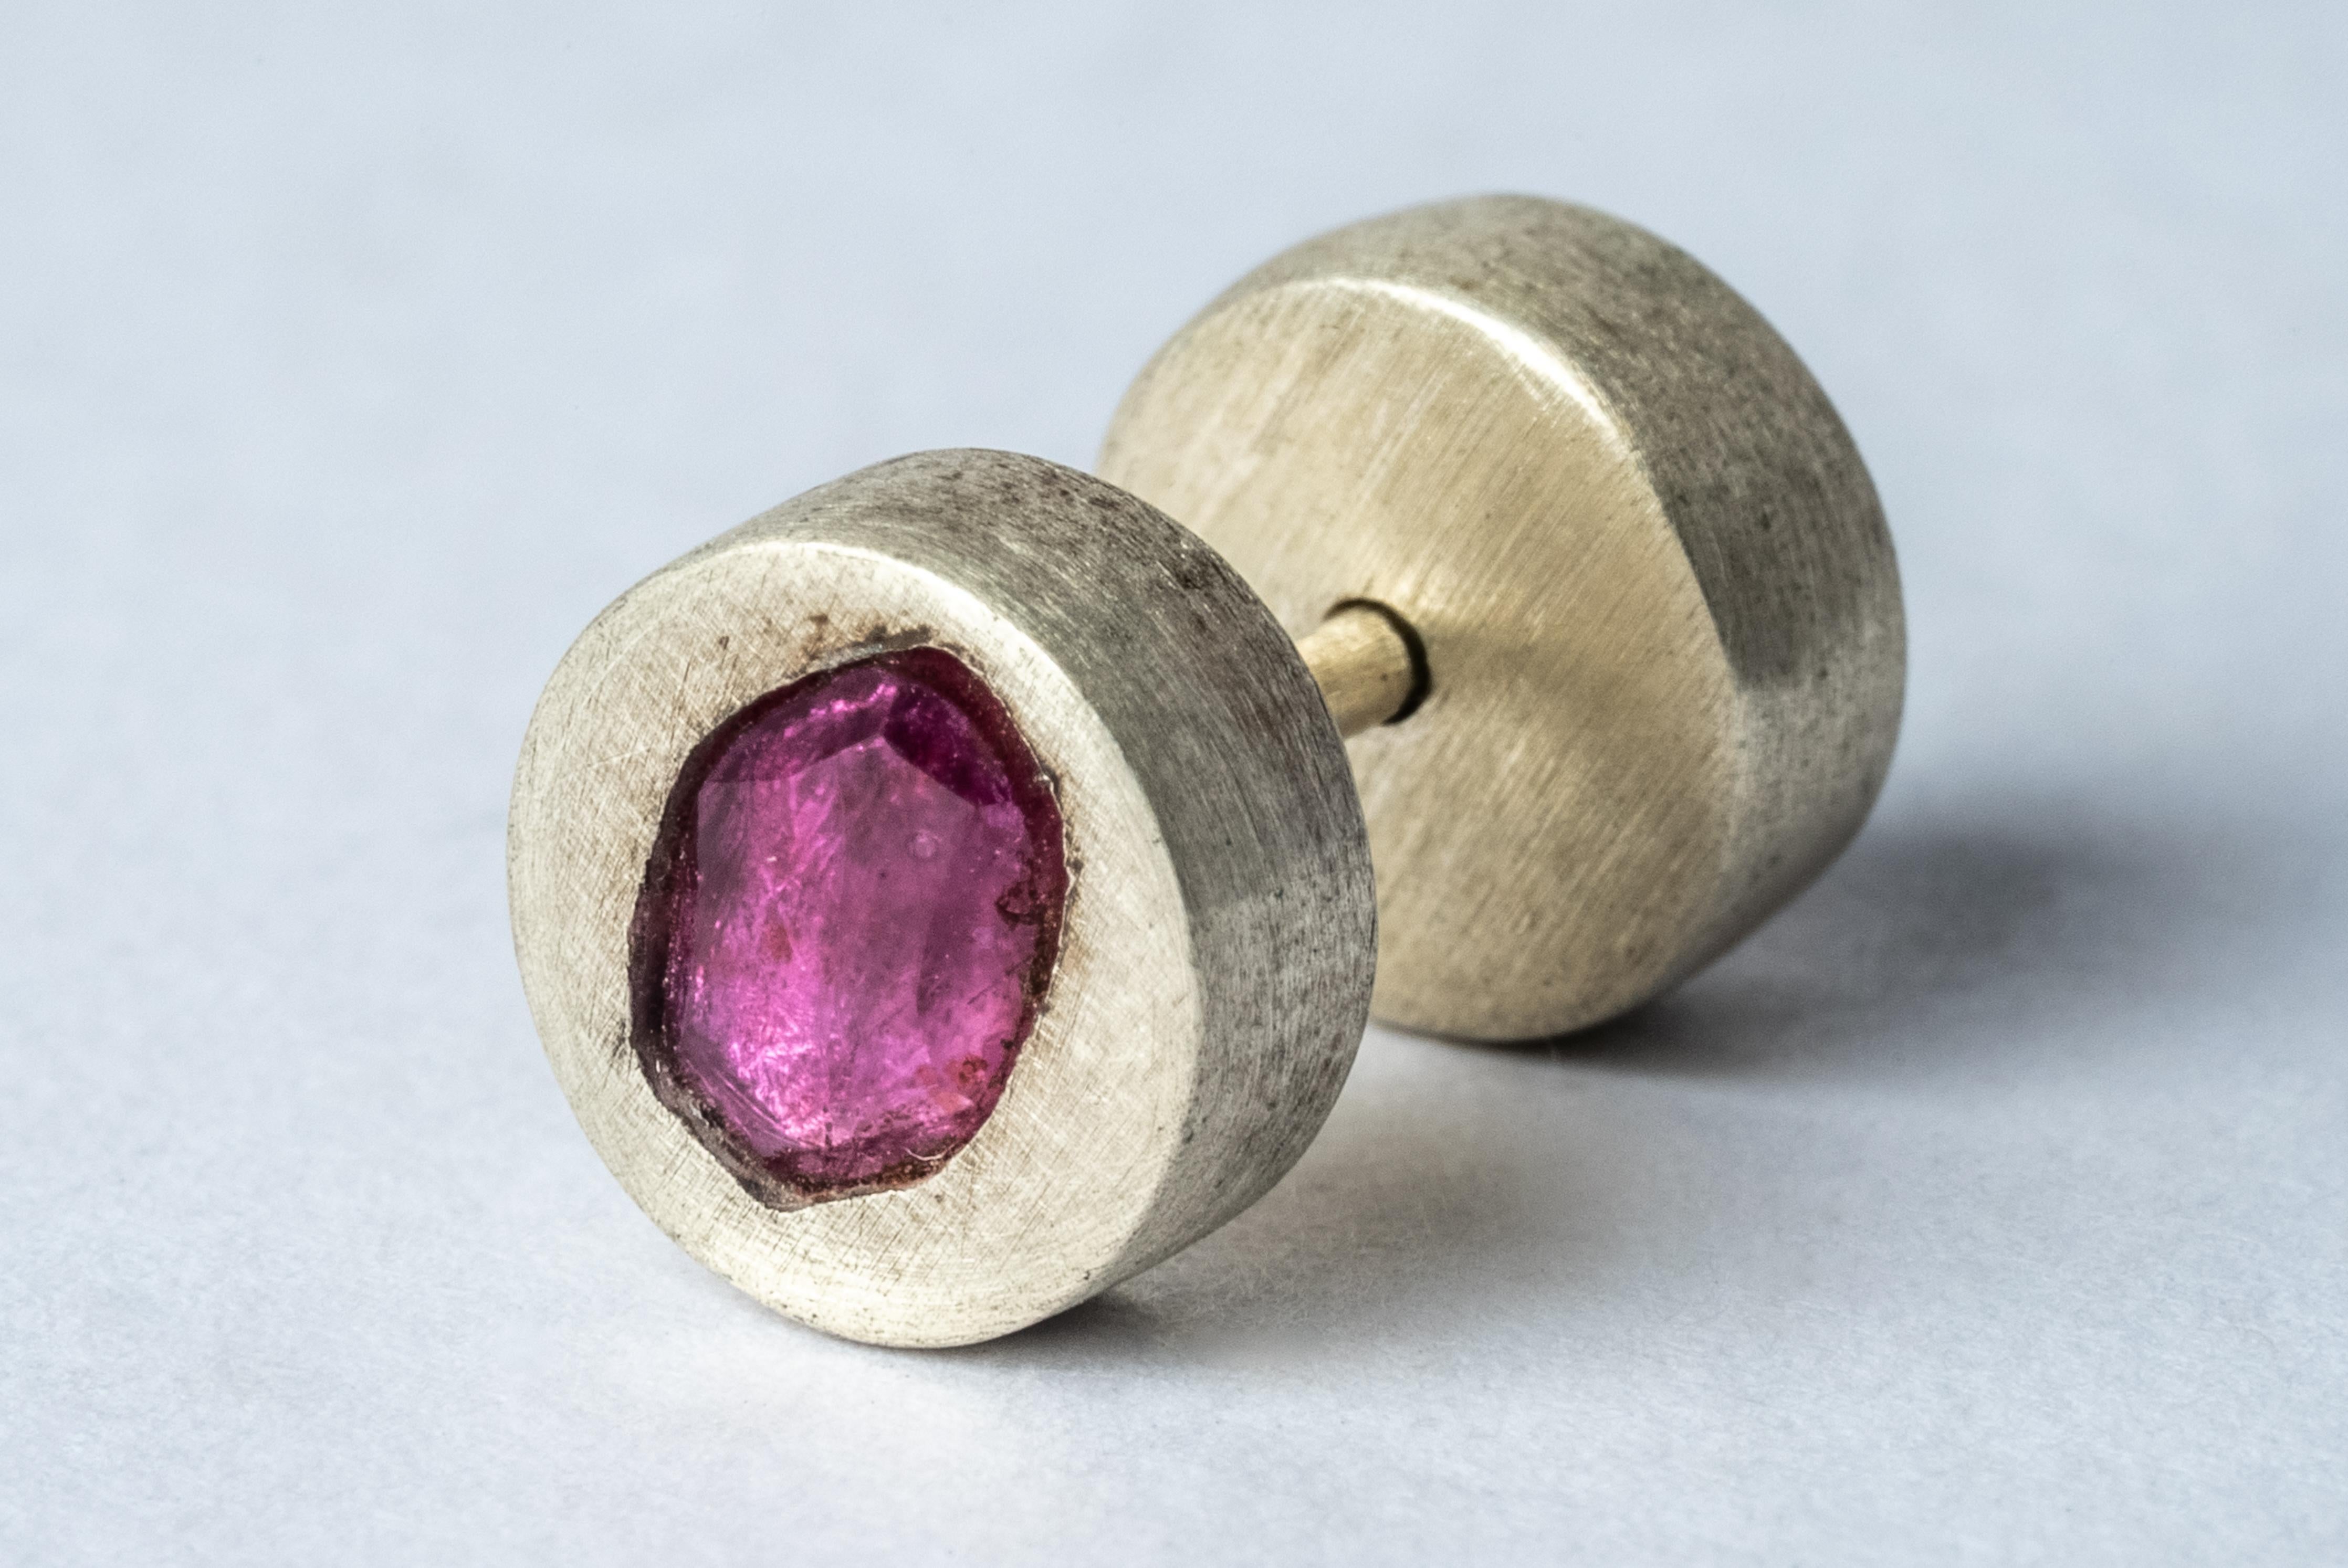 Stud earring in sterling silver and a slab of rough ruby (faceted). This item is made with a naturally occurring element and will vary from the photograph you see. Each piece is unique and this is what makes it special
Sold as a single piece.